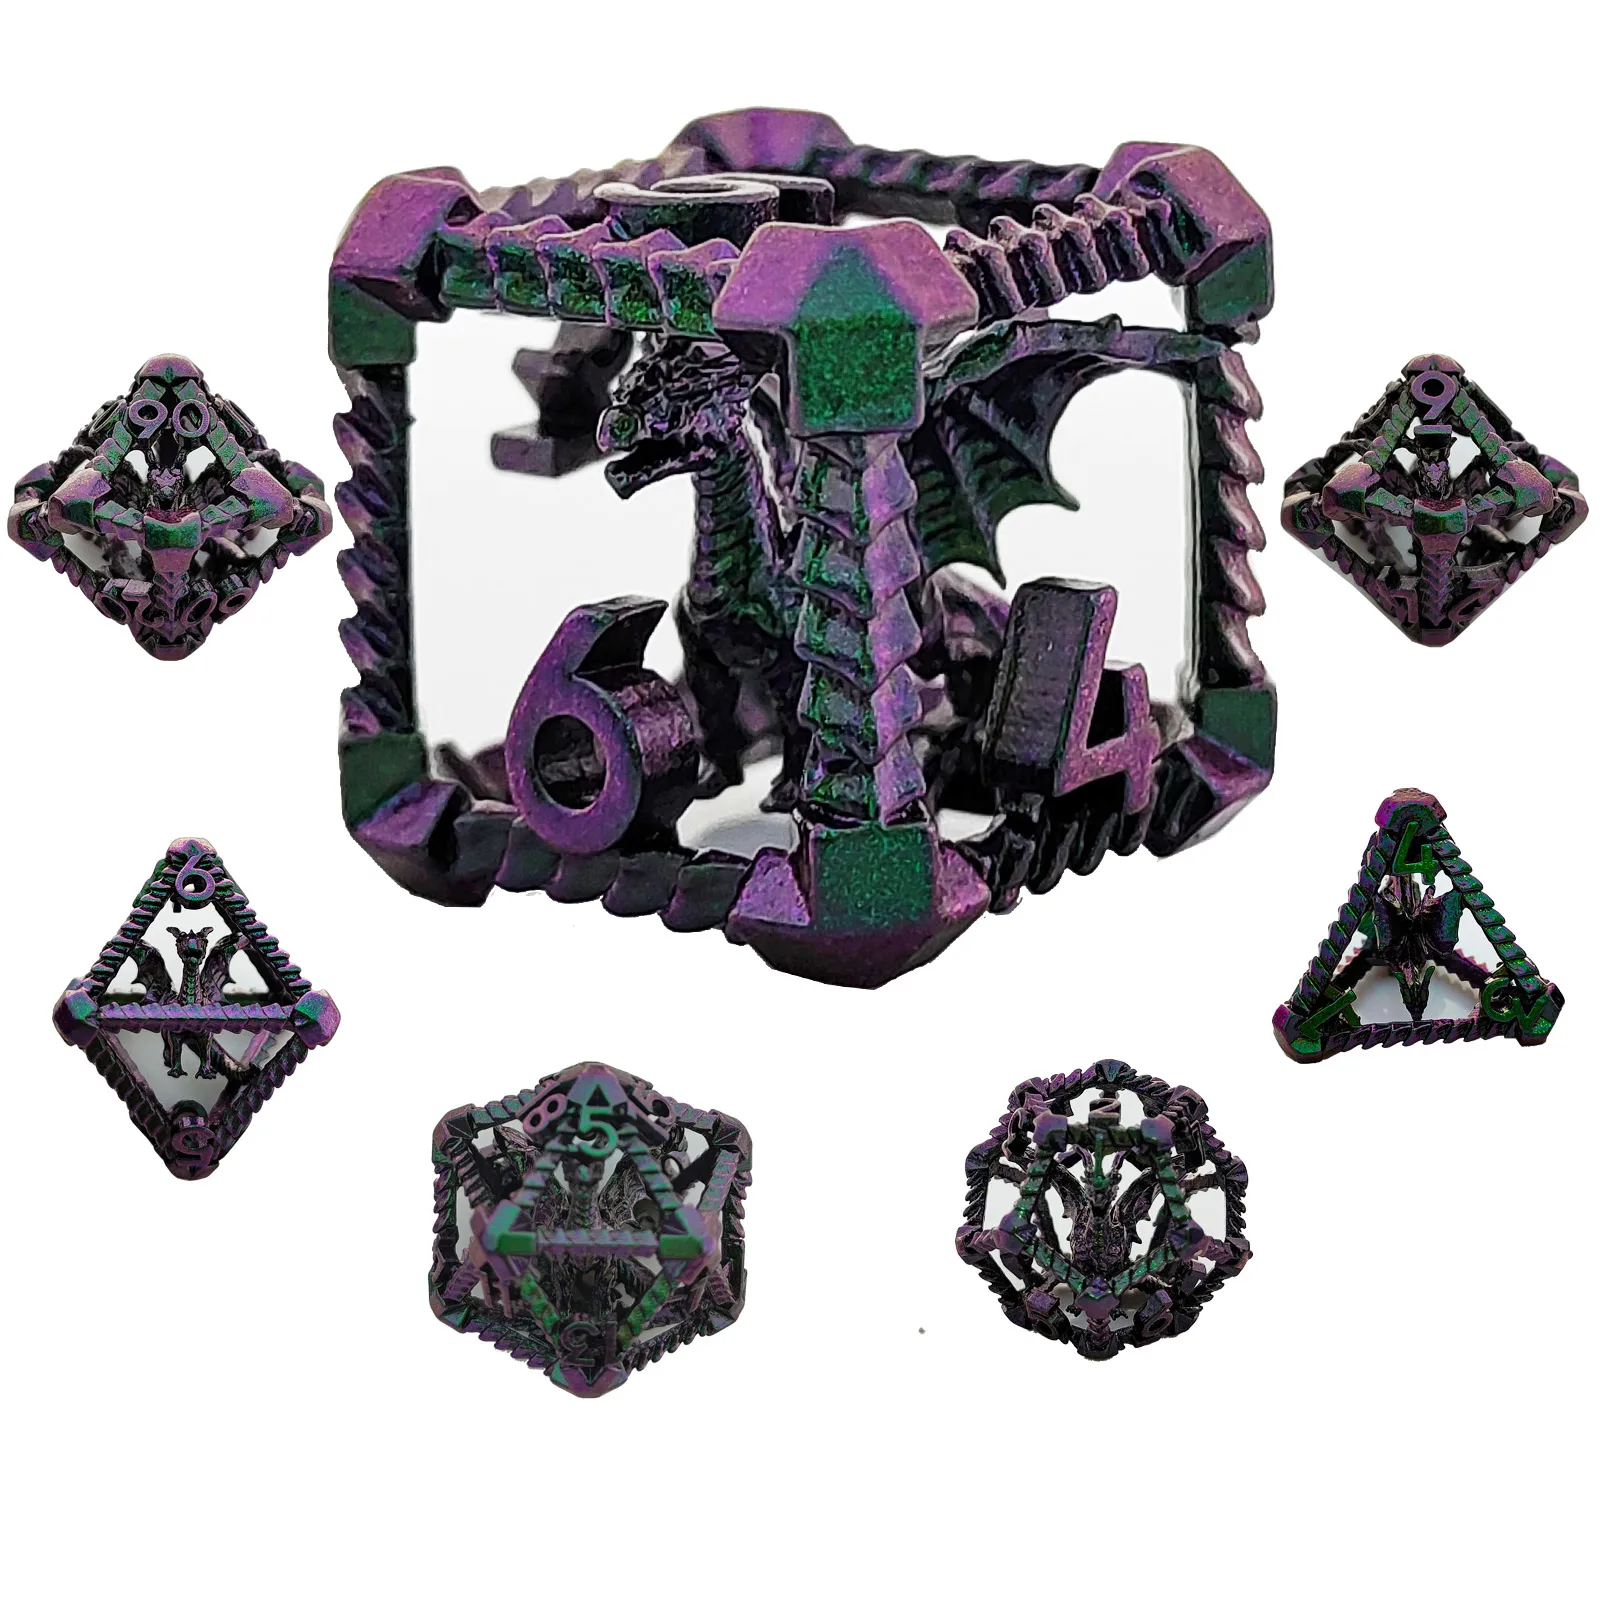 DND Hollow Metal Giant Polyhedral Dragon Dice 7-Piece Set for Roleplaying Tabletop Games Halloween Party Accessories Christmas G